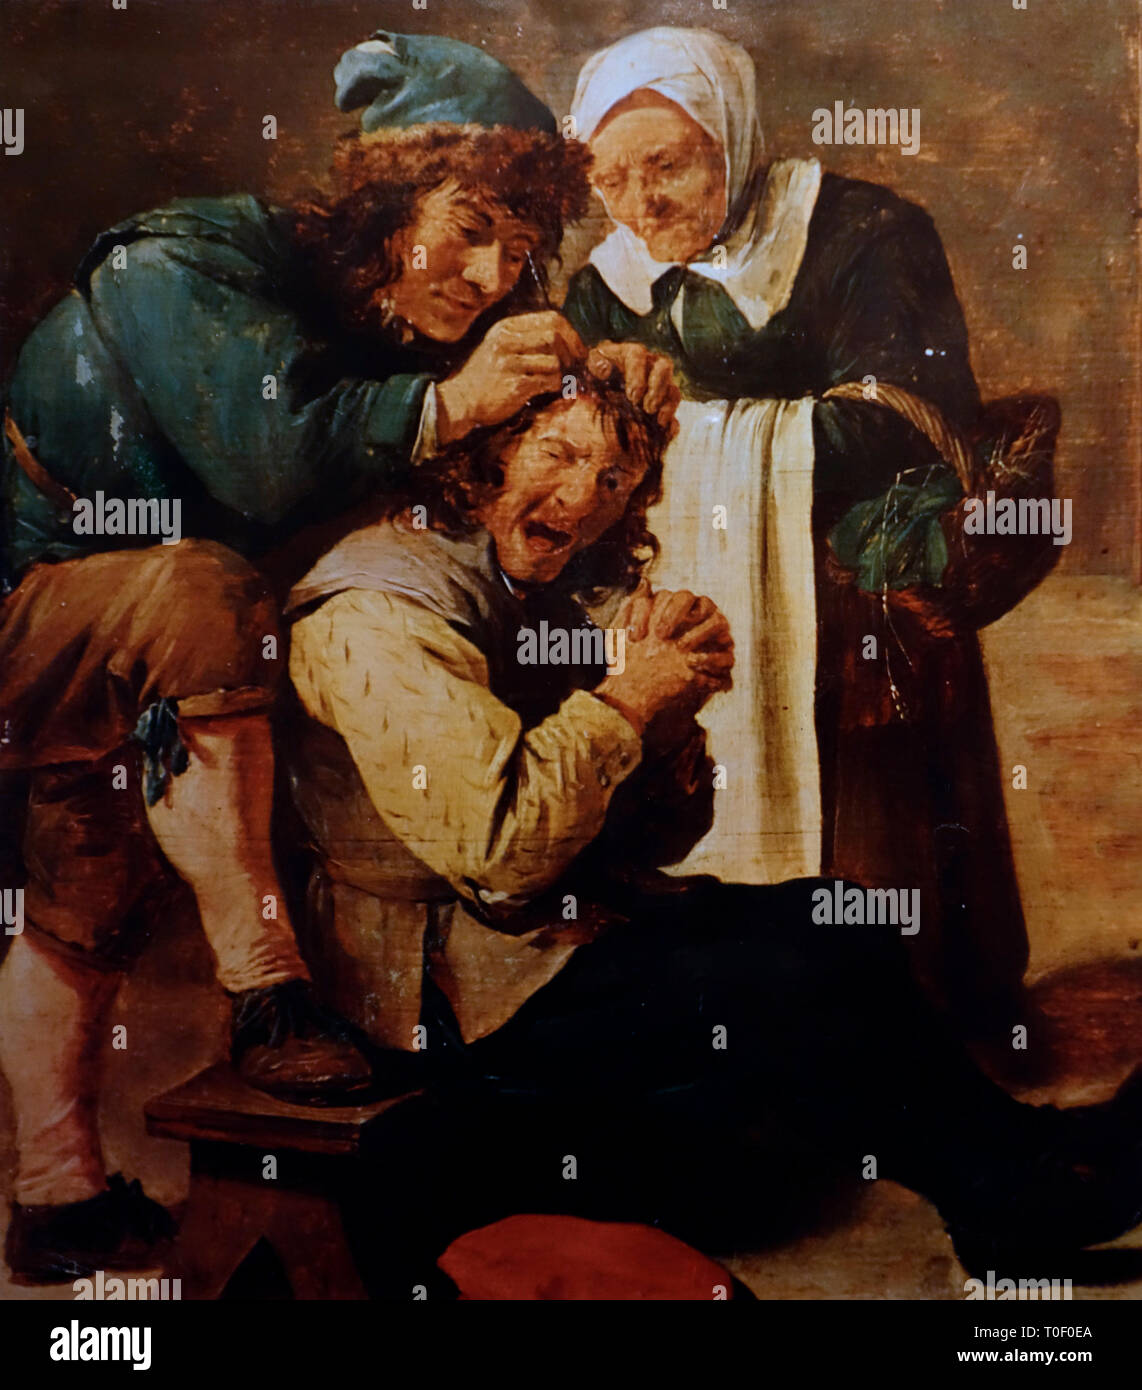 Painting showing trepanation / trepanning, surgical intervention in which a hole is drilled or scraped into the human skull Stock Photo